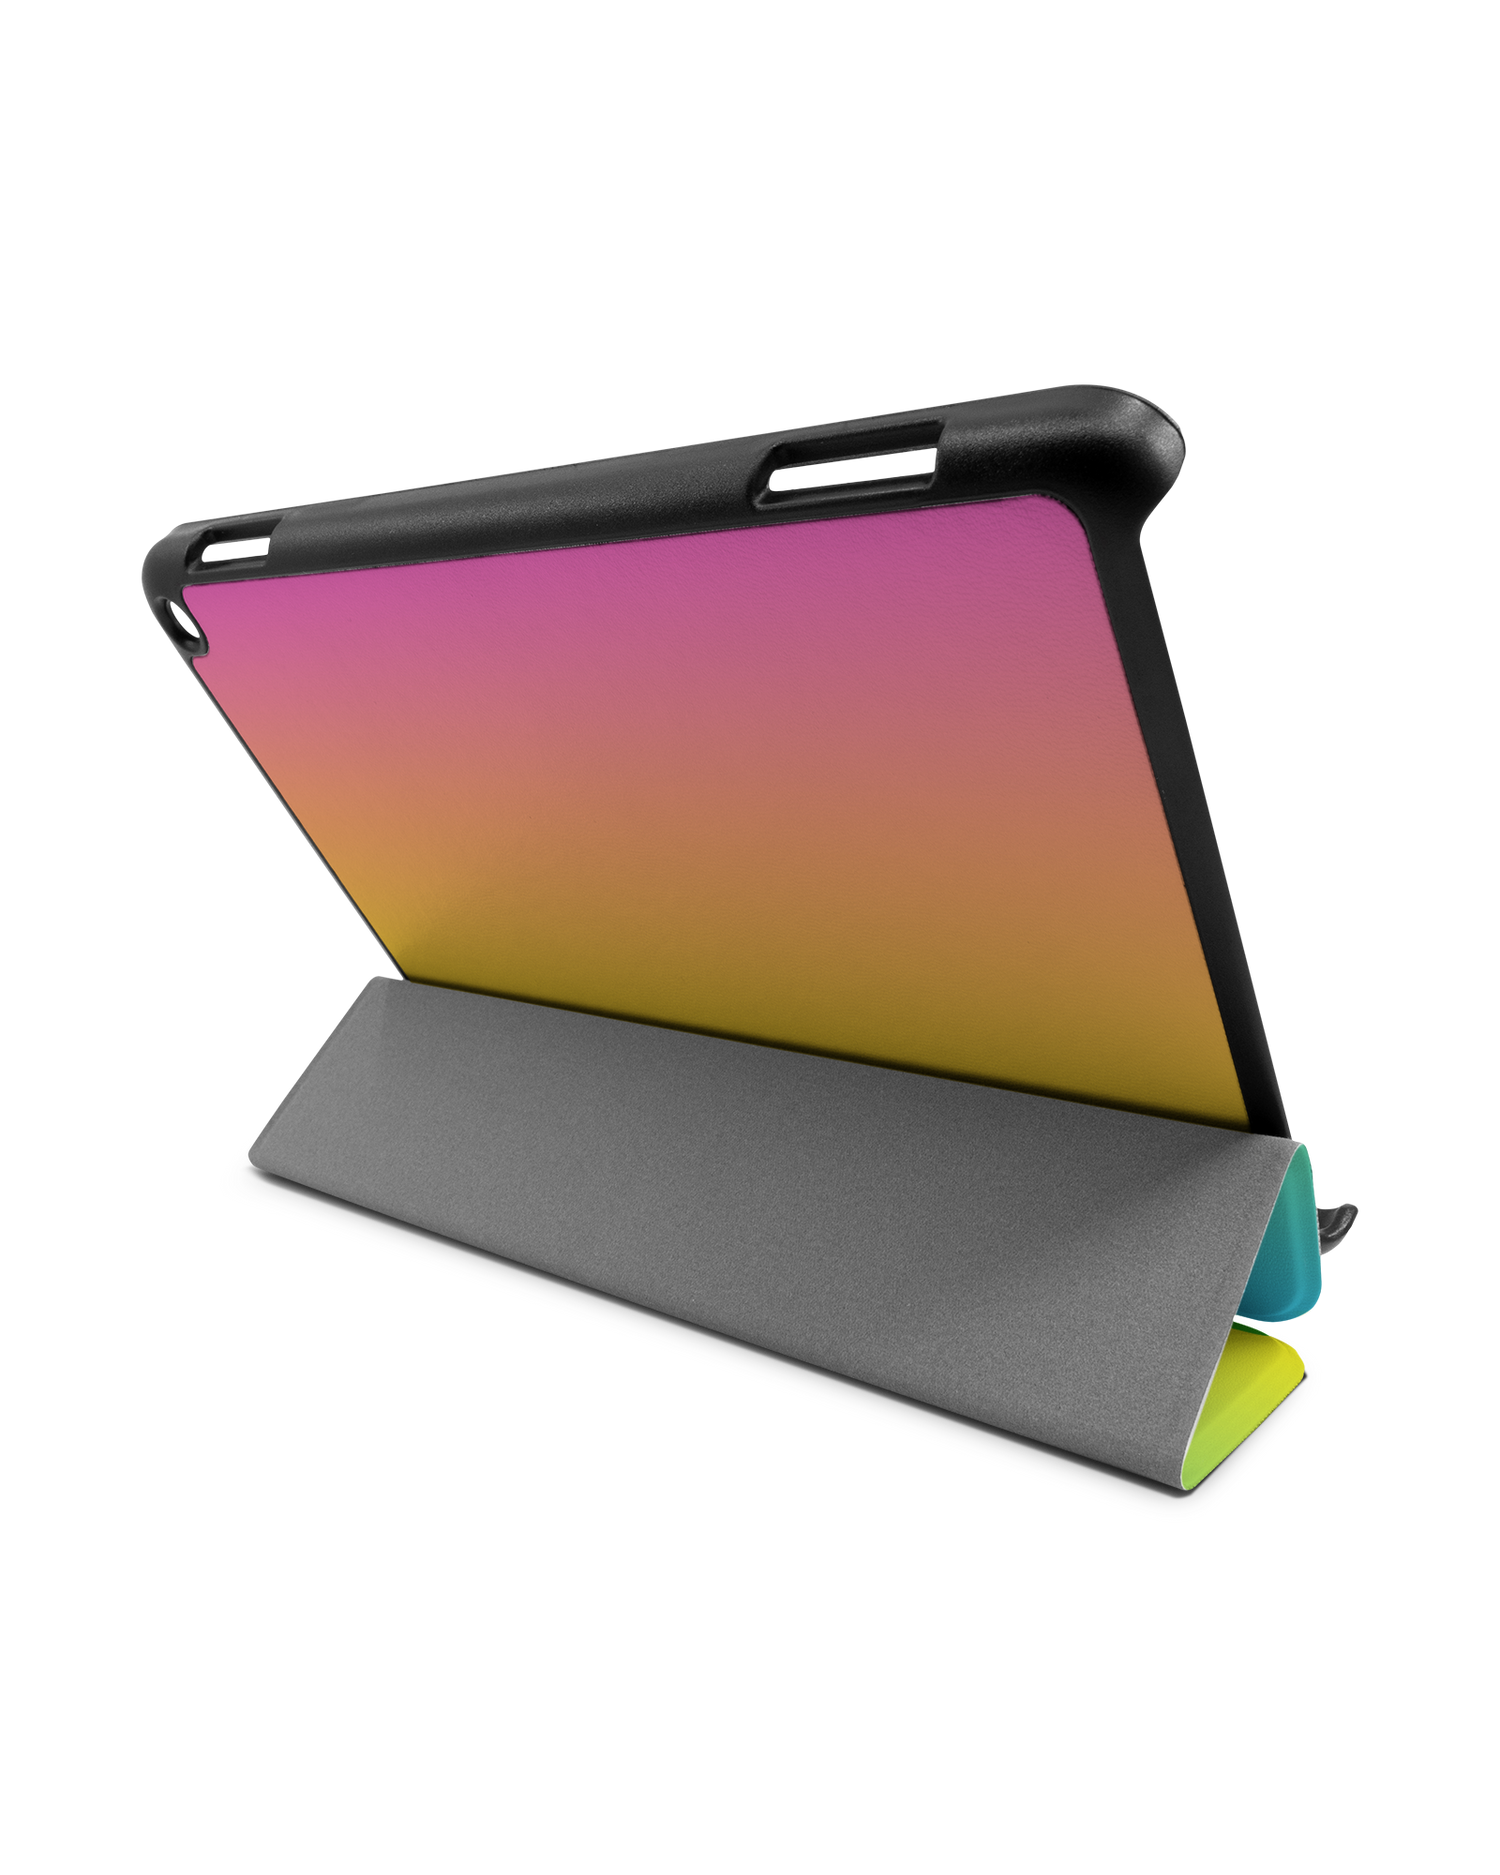 Have A Day Tablet Smart Case for Amazon Fire HD 8 (2022), Amazon Fire HD 8 Plus (2022), Amazon Fire HD 8 (2020), Amazon Fire HD 8 Plus (2020): Used as Stand